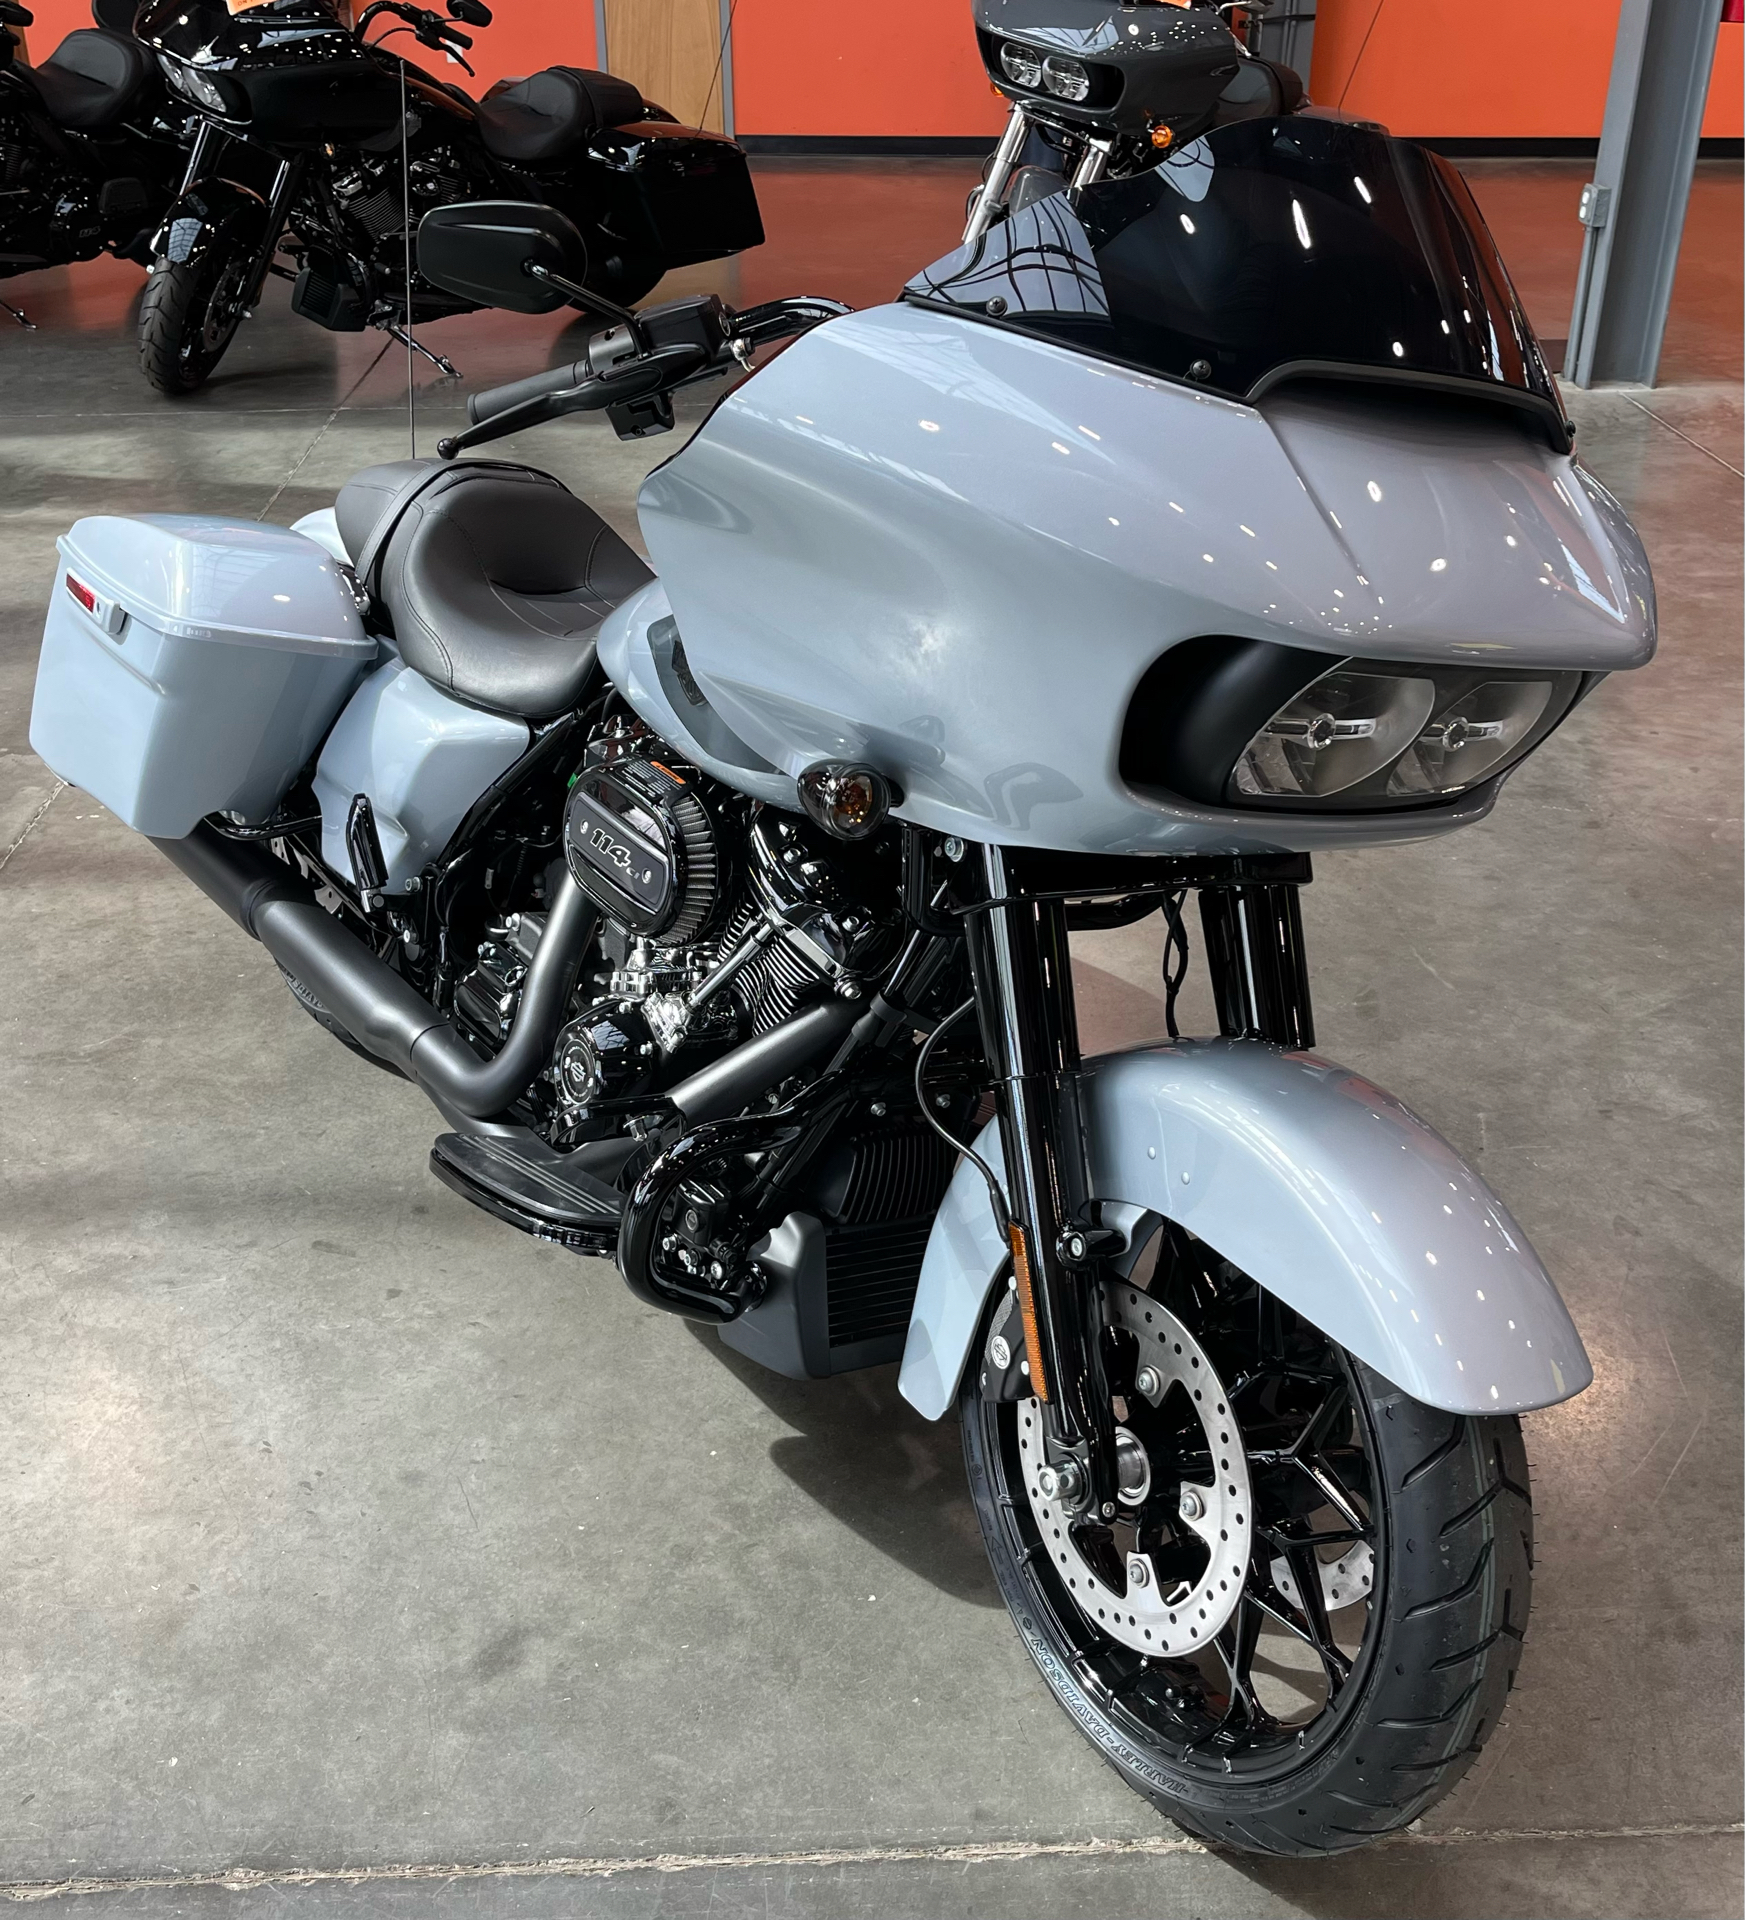 2023 Harley-Davidson Road Glide Special in Columbia, Tennessee - Photo 2